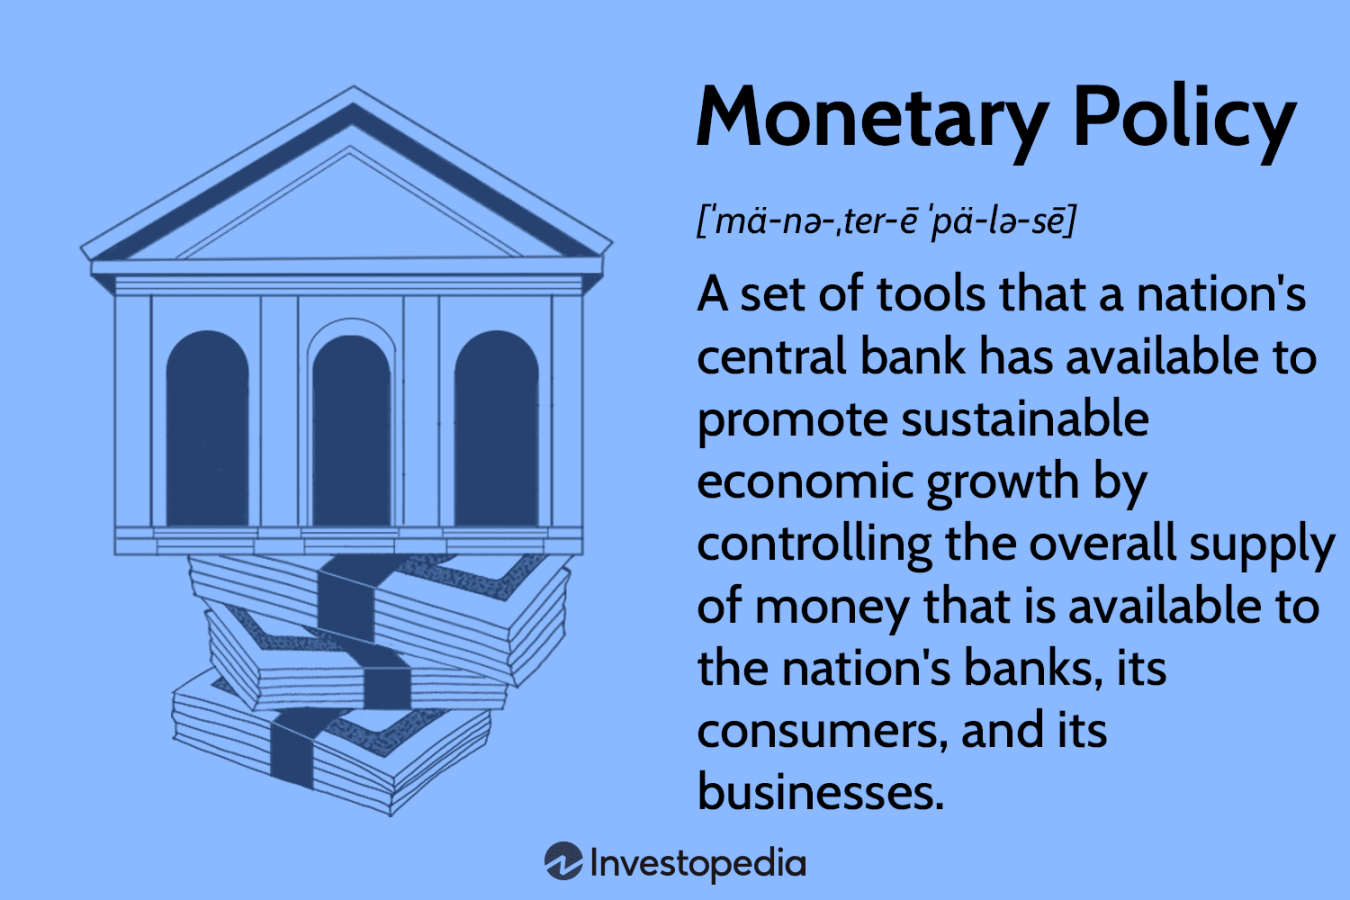 Monetary Policy Meaning, Types, and Tools